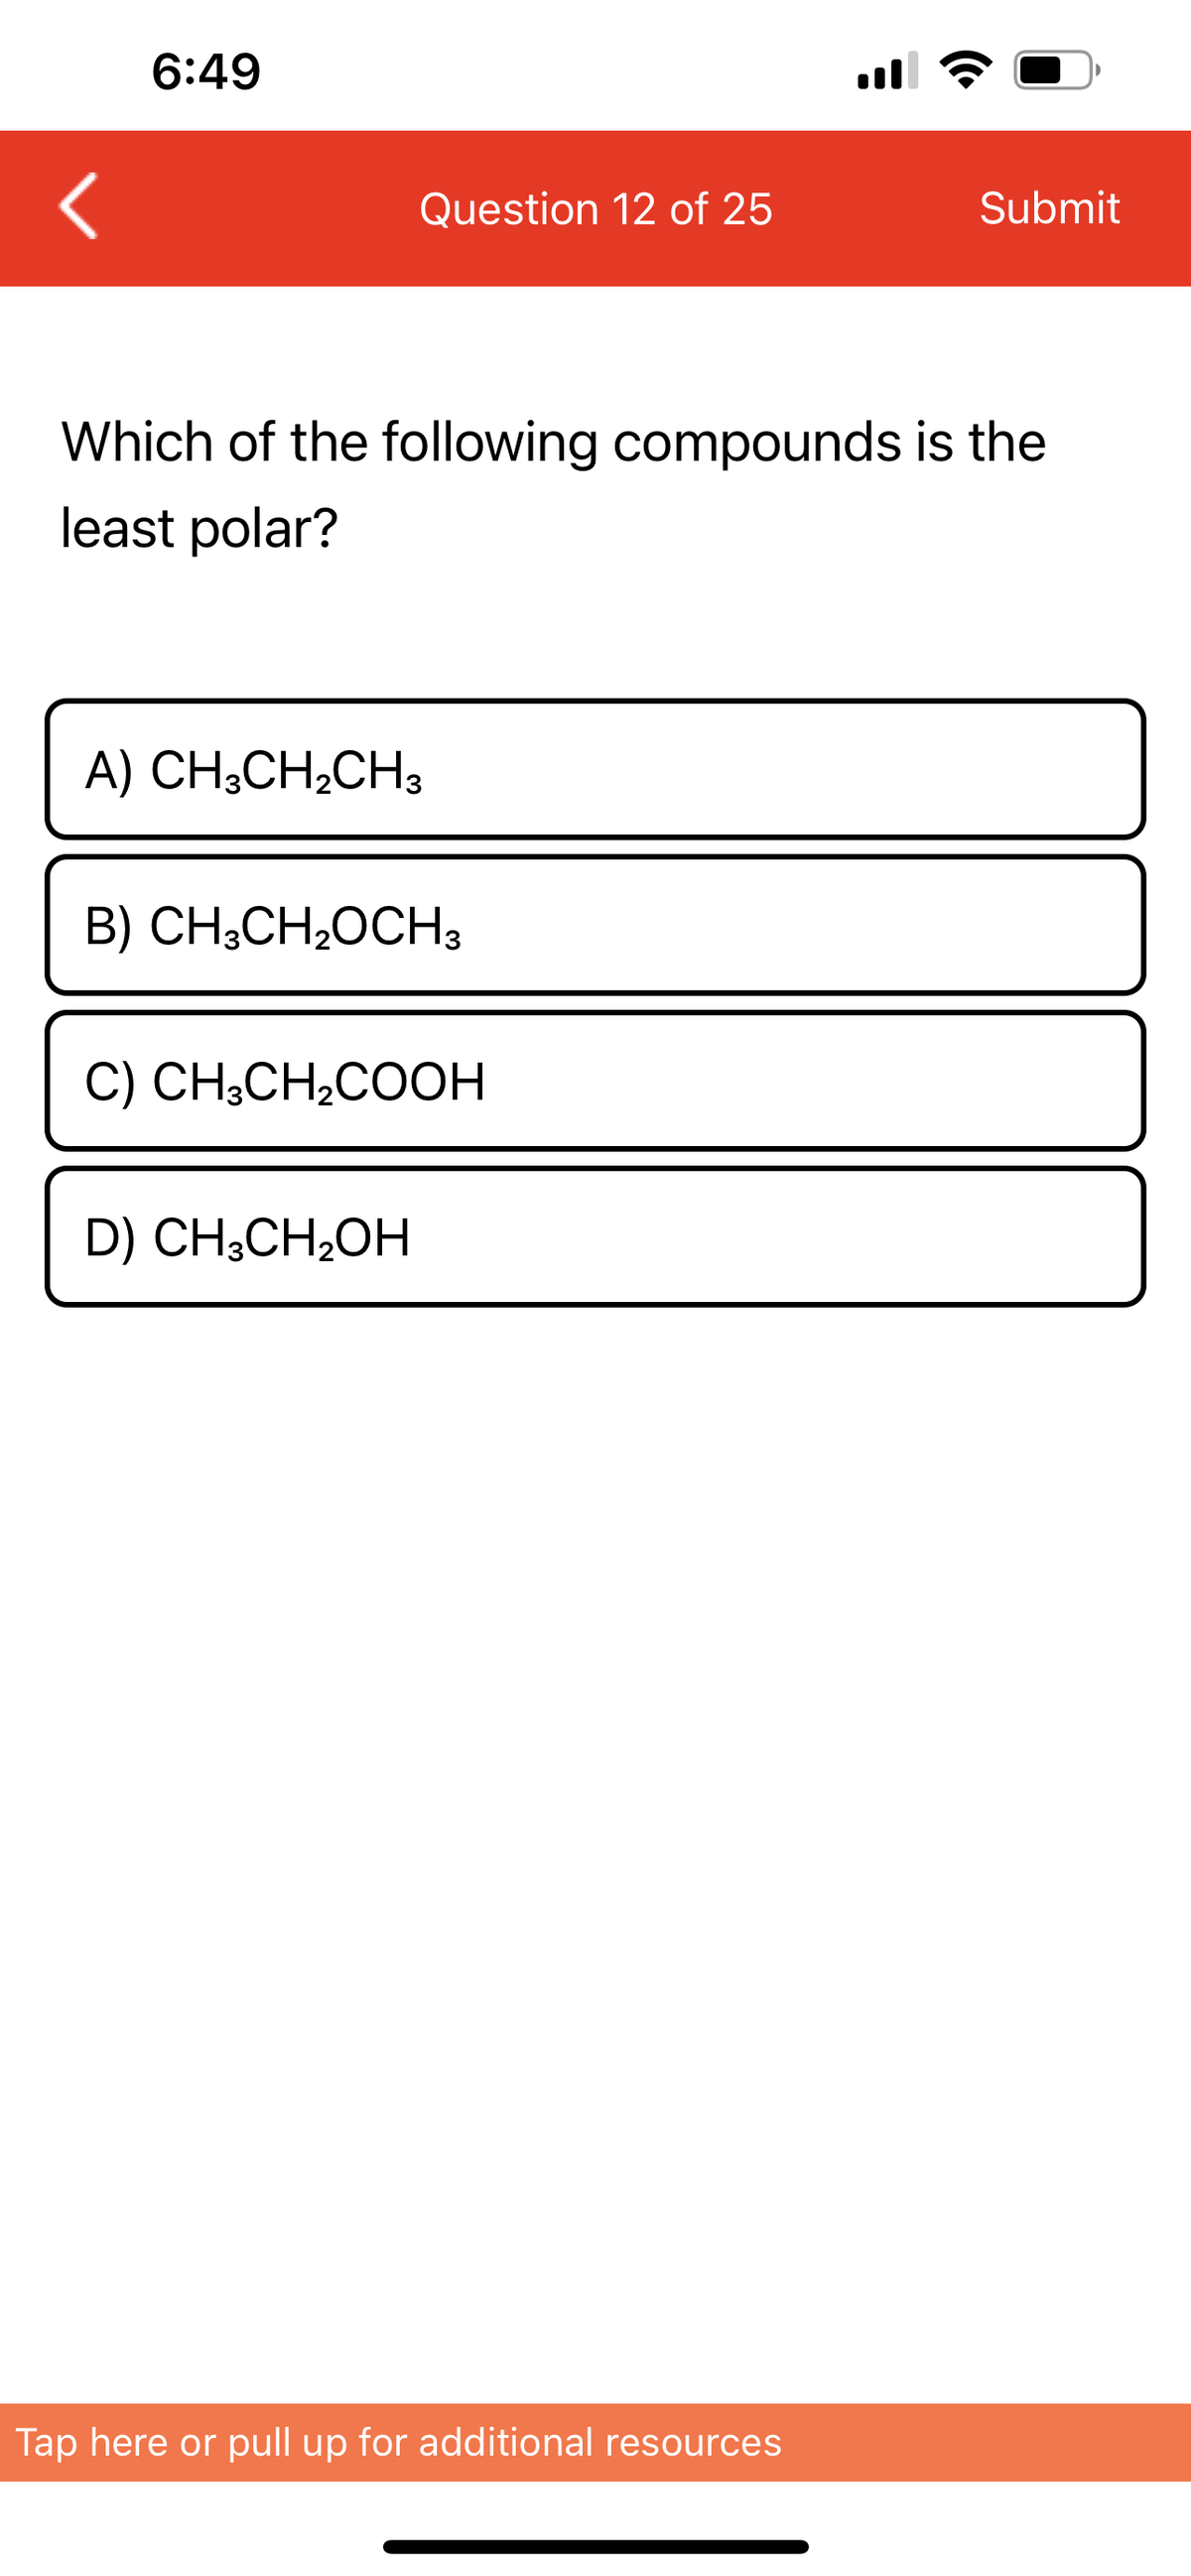 6:49
Question 12 of 25
Submit
Which of the following compounds is the
least polar?
A) CH3CH₂CH3
B) CH3CH₂OCH 3
C) CH3CH₂COOH
D) CH3CH₂OH
Tap here or pull up for additional resources